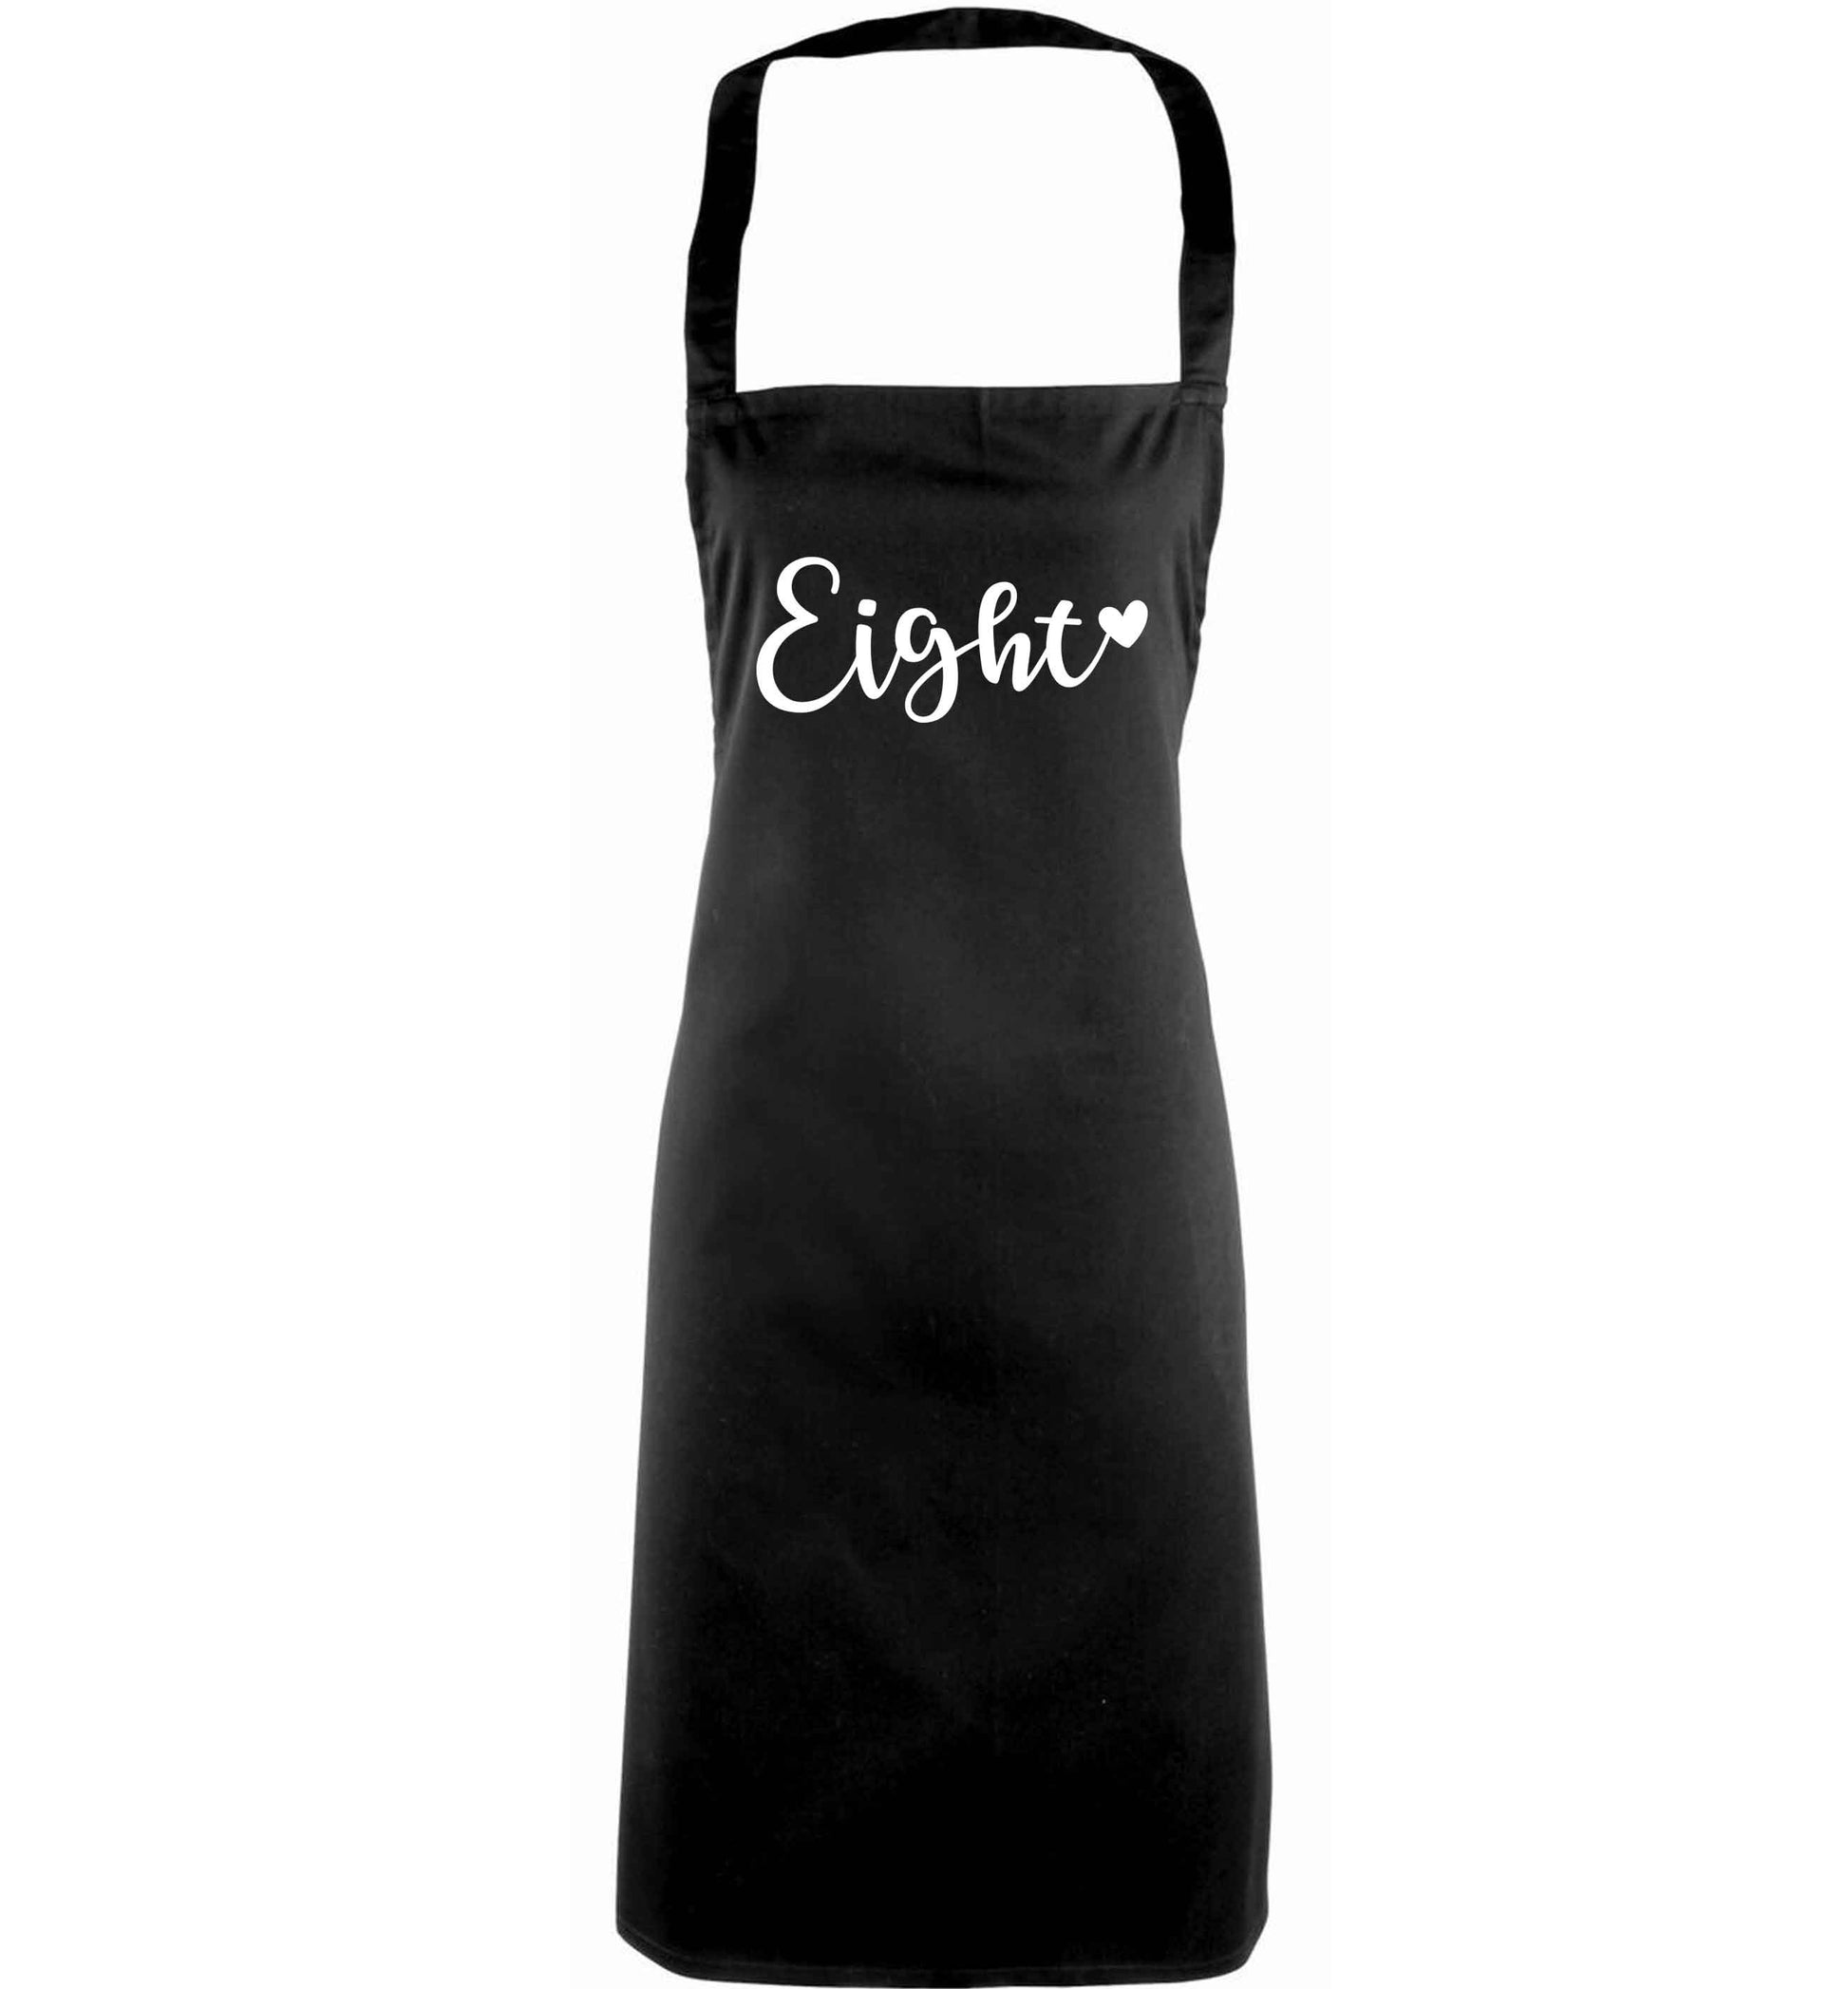 Eight and heart adults black apron